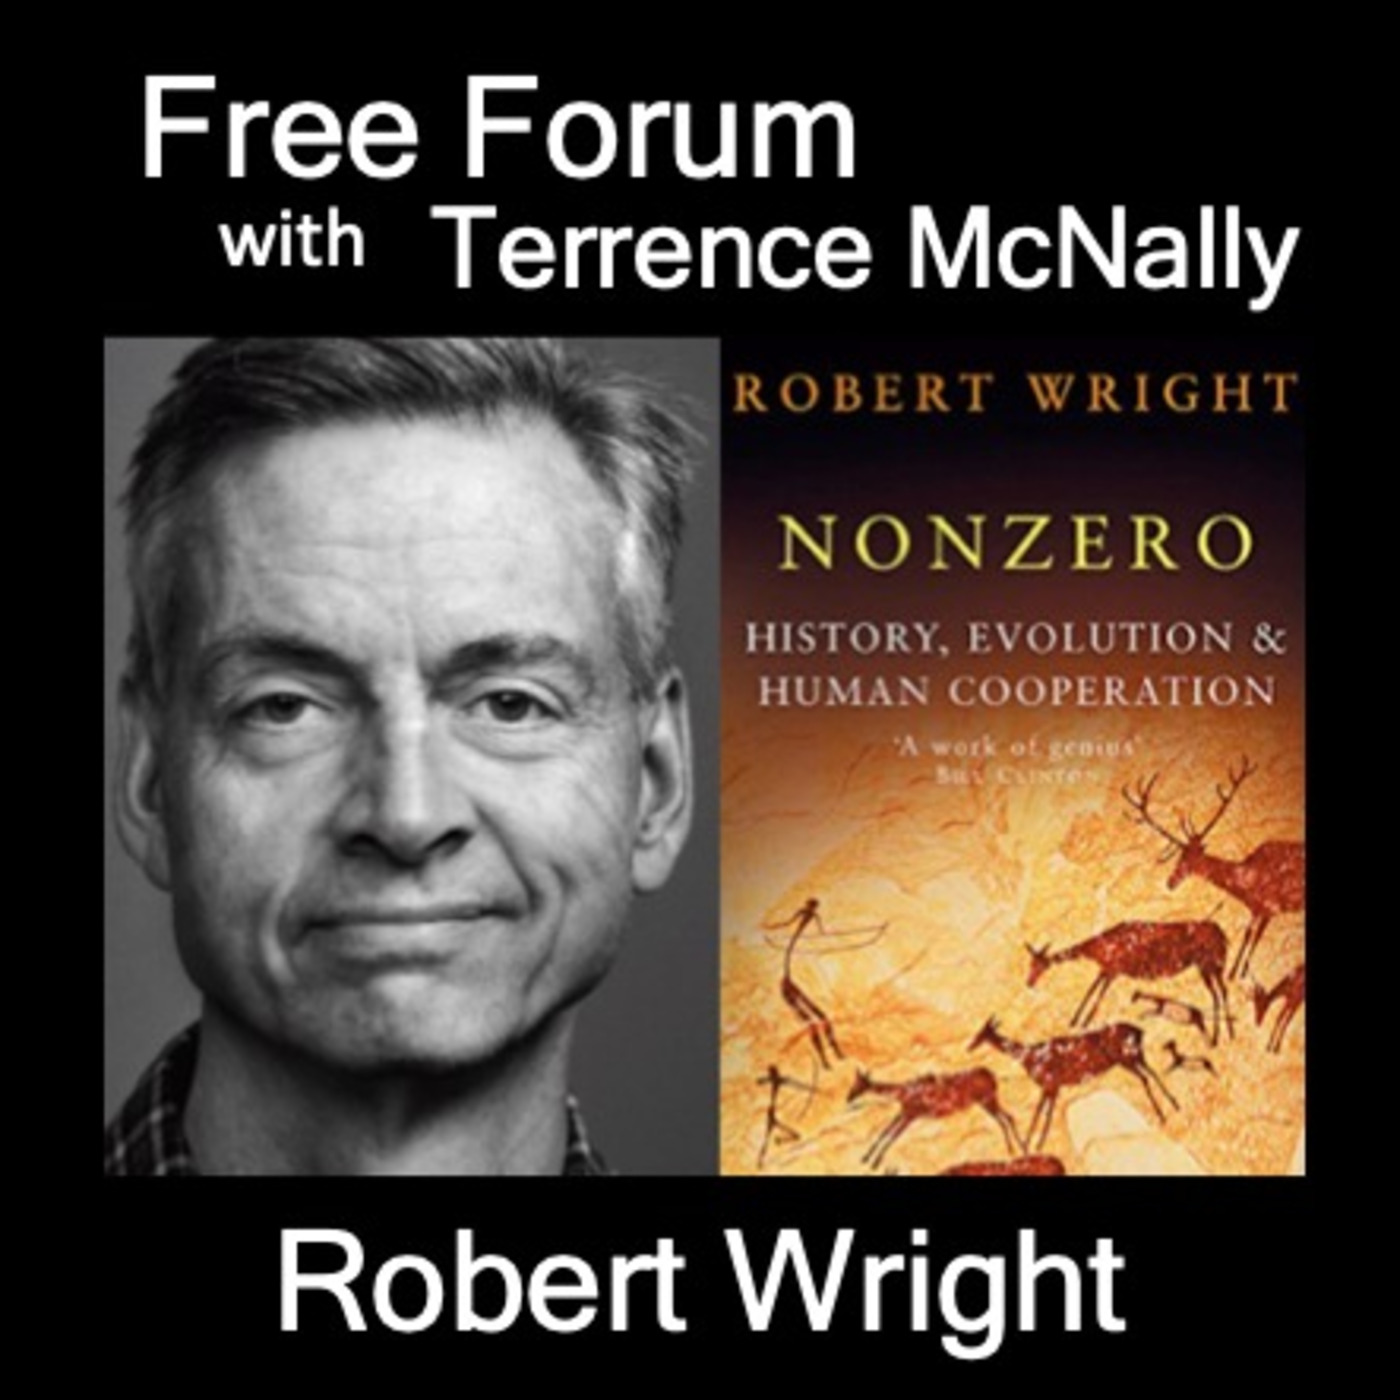 ROBERT WRIGHT-Why are Americans divided as they confront a pandemic?